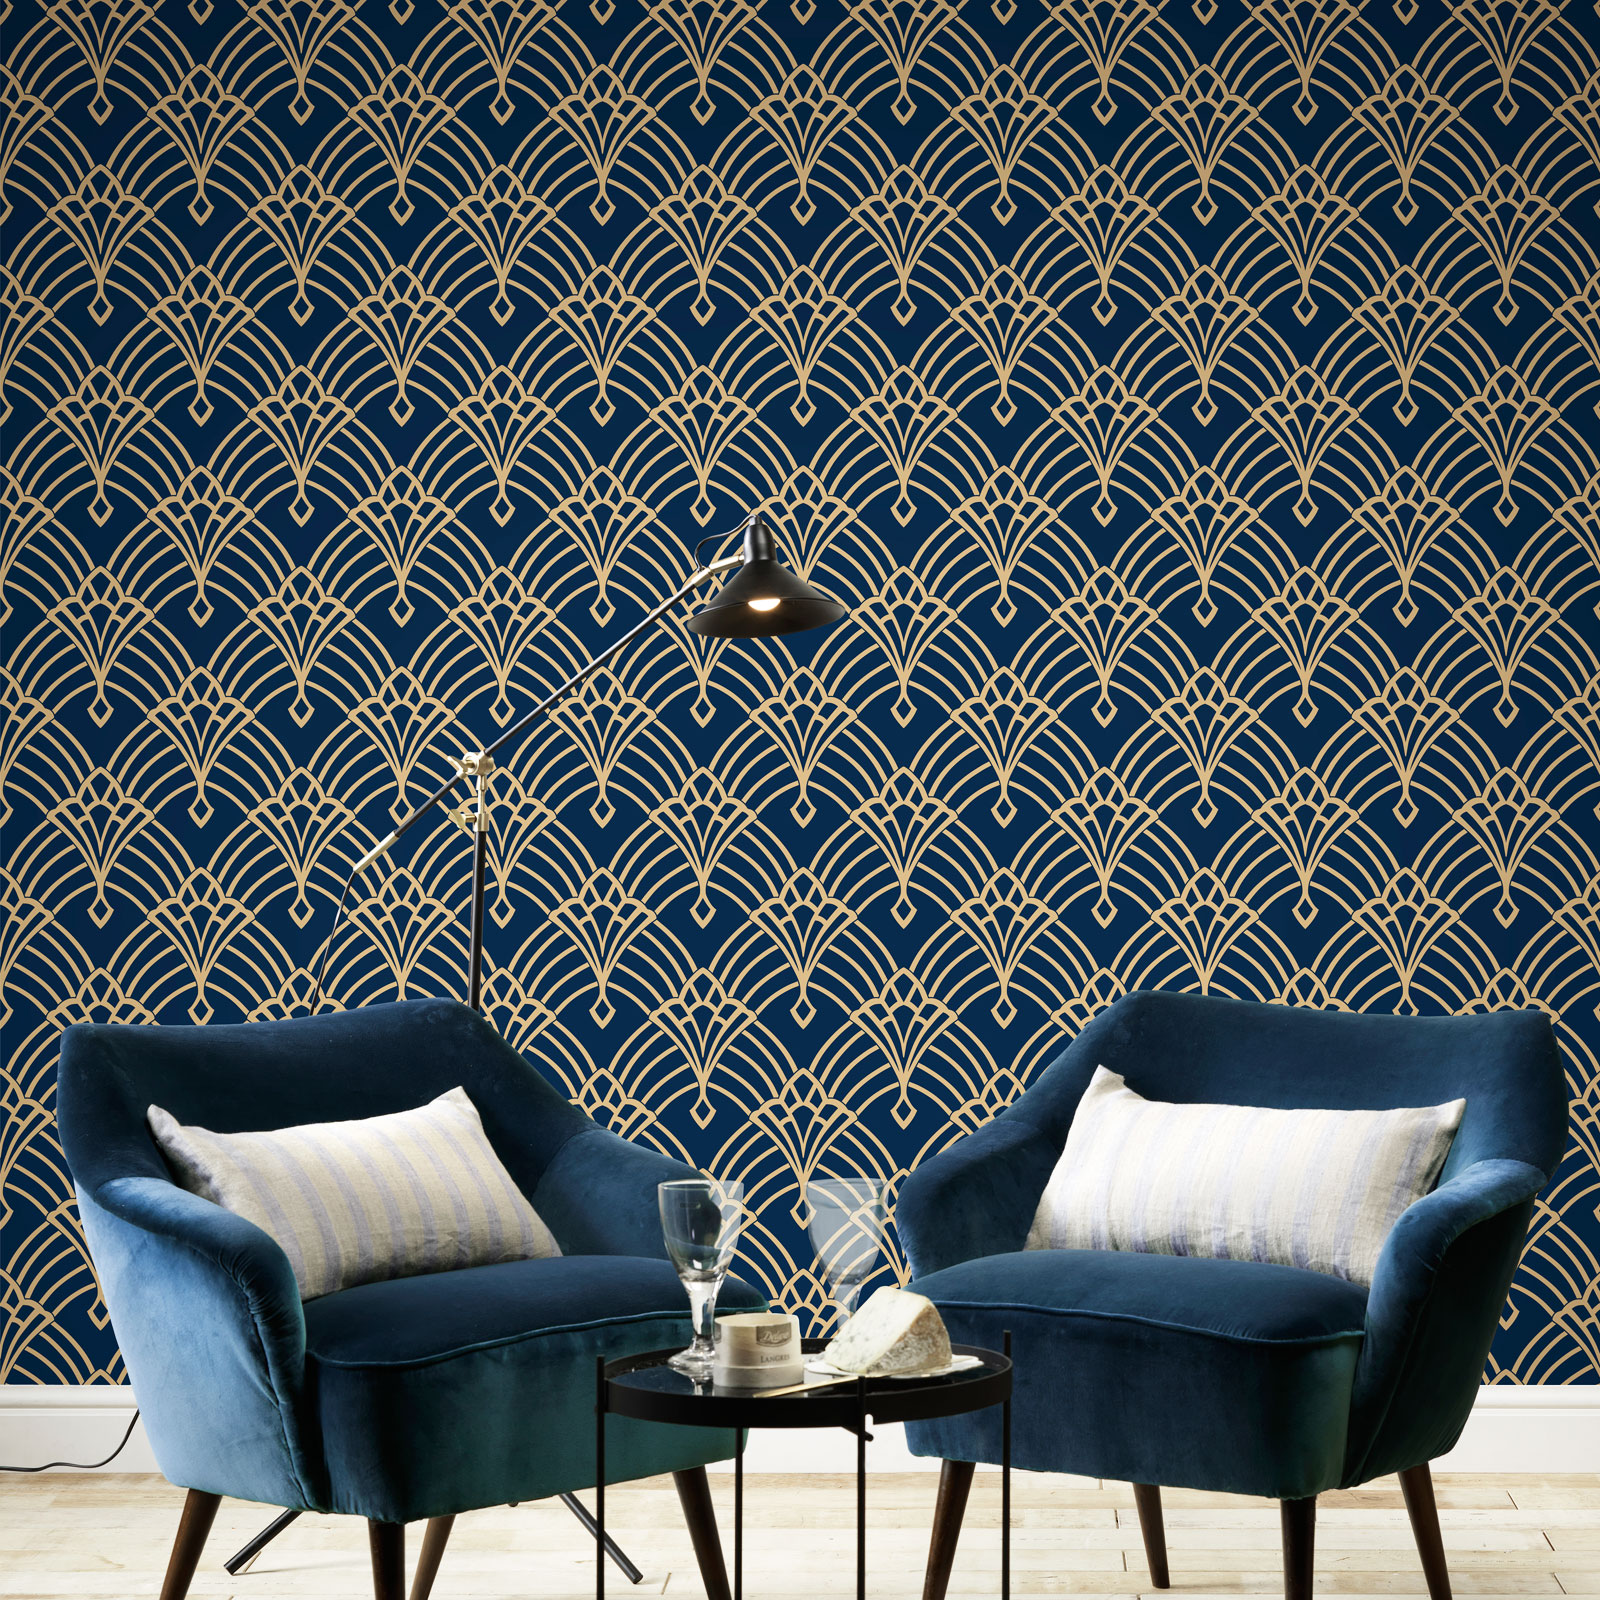 30 Bedroom wallpaper ideas to make a statement  Ideal Home